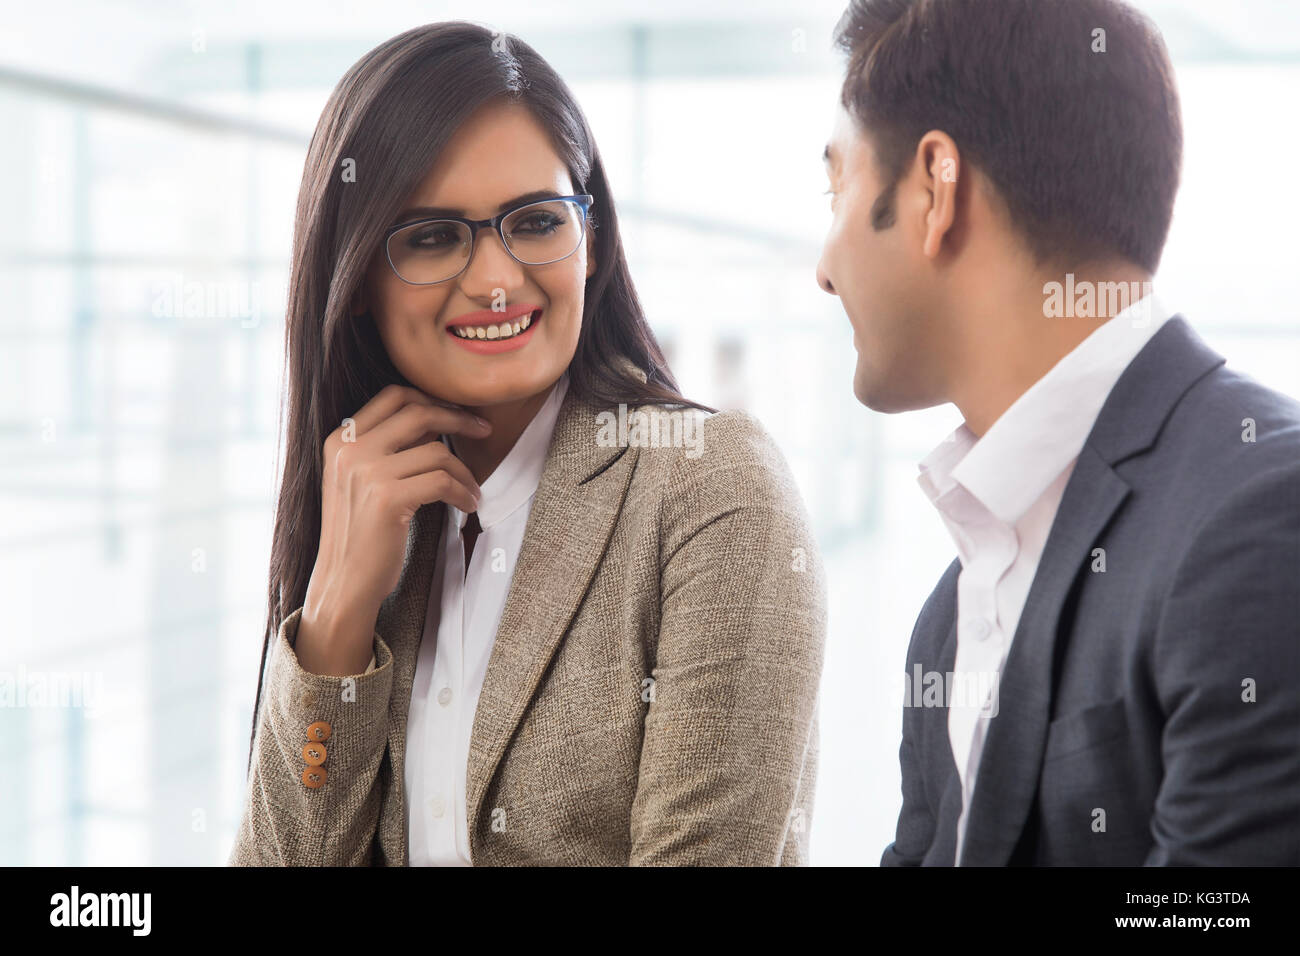 Portrait of young business people smiling Stock Photo